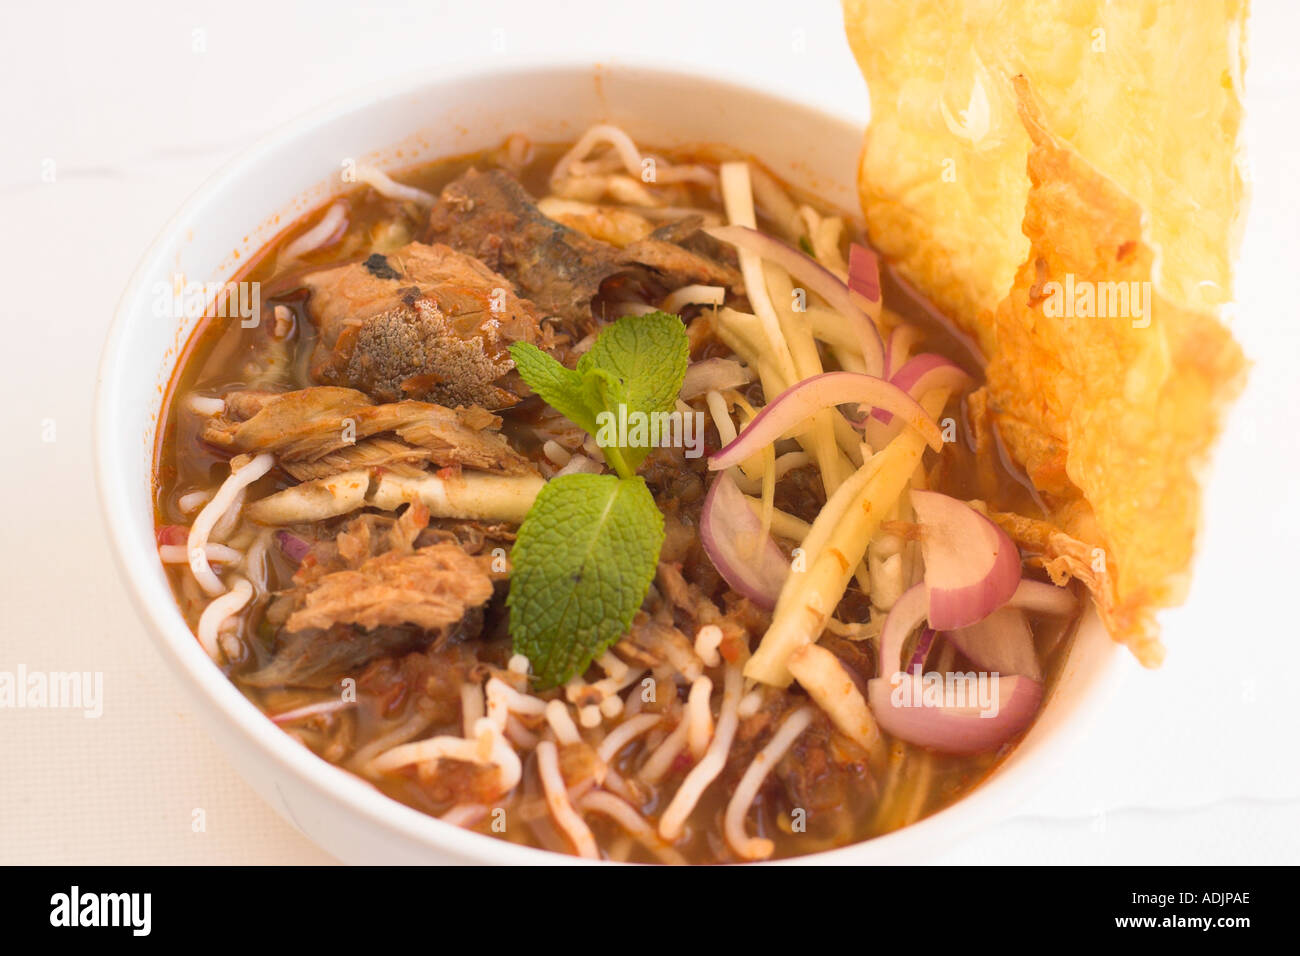 Penang Assam Laksa in spicy sour tamarind broth Stock Photo